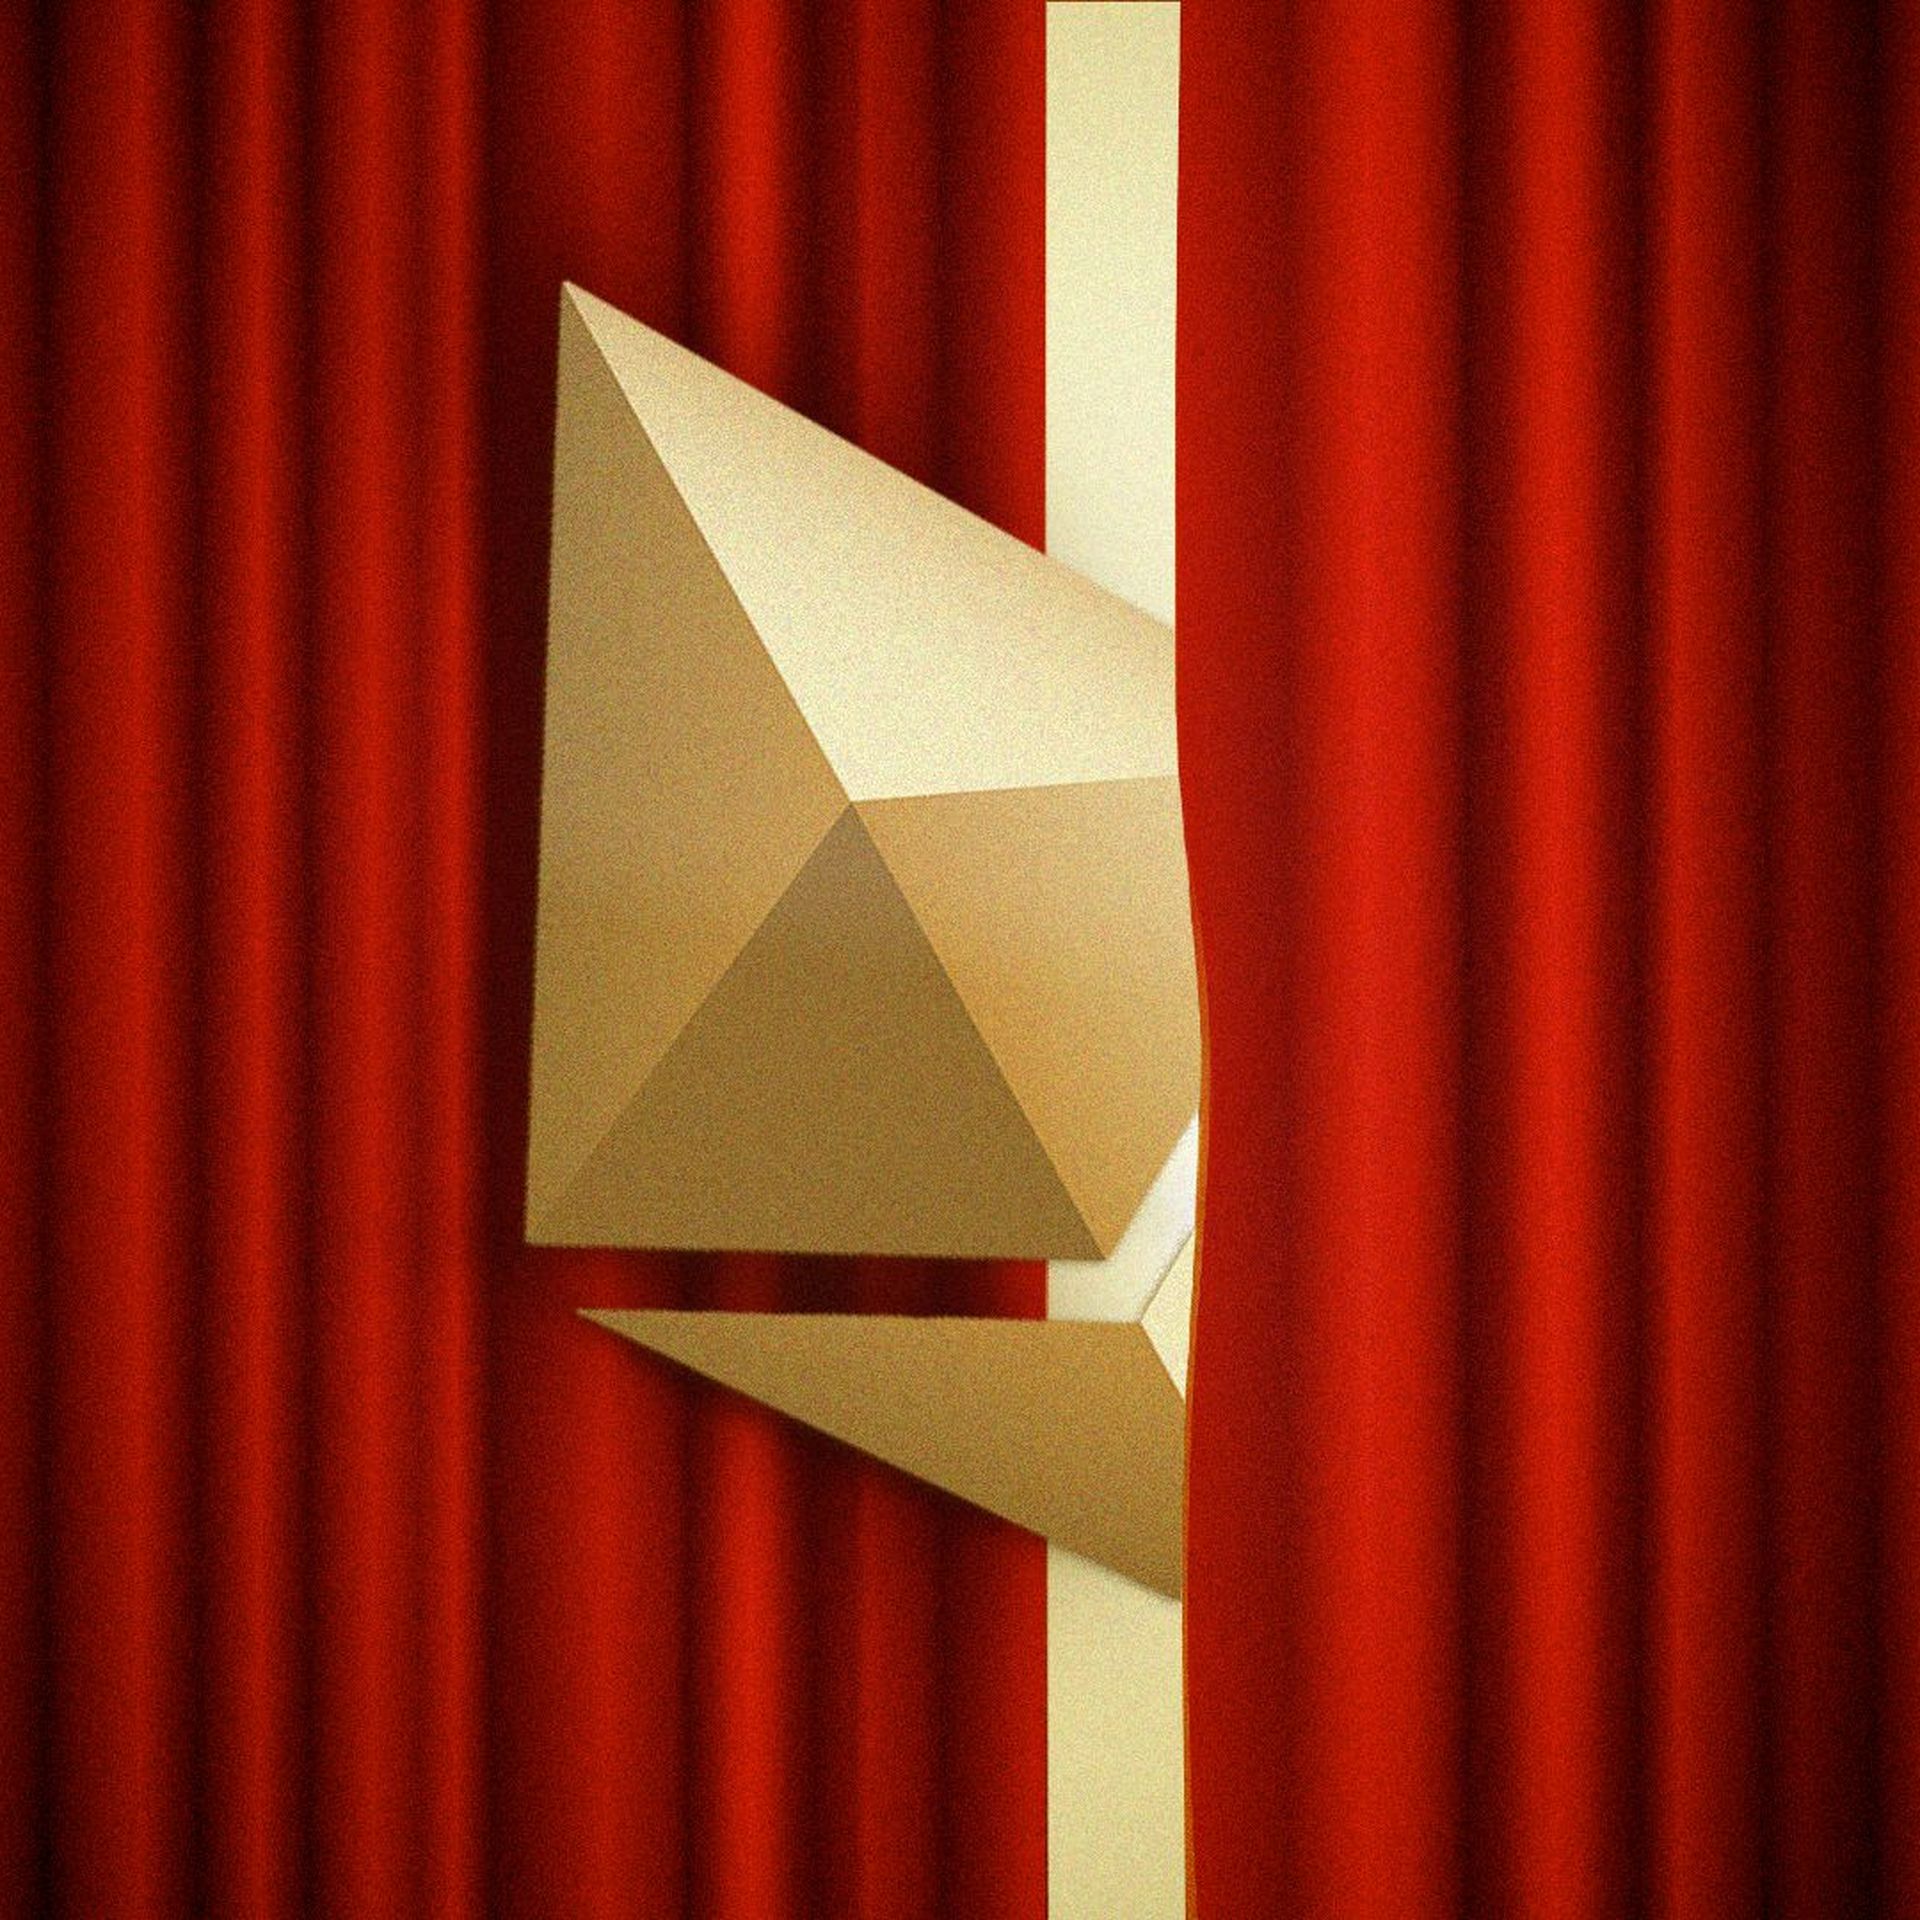 Illustration of the Ethereum logo peeking out from behind a curtain.